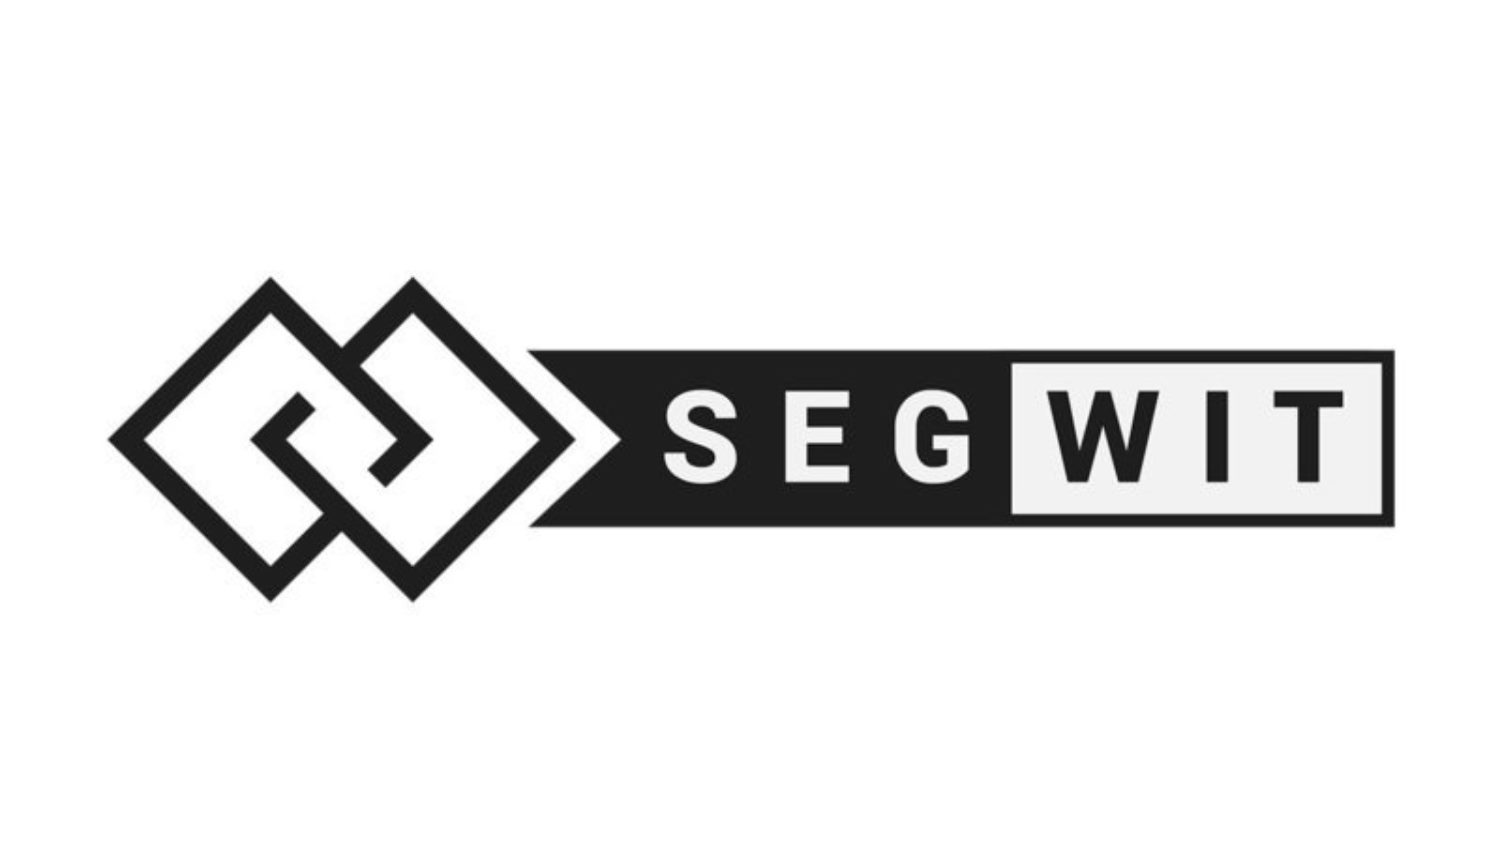 How Do You Know Litecoin Legacy Or Segwit Addresses?